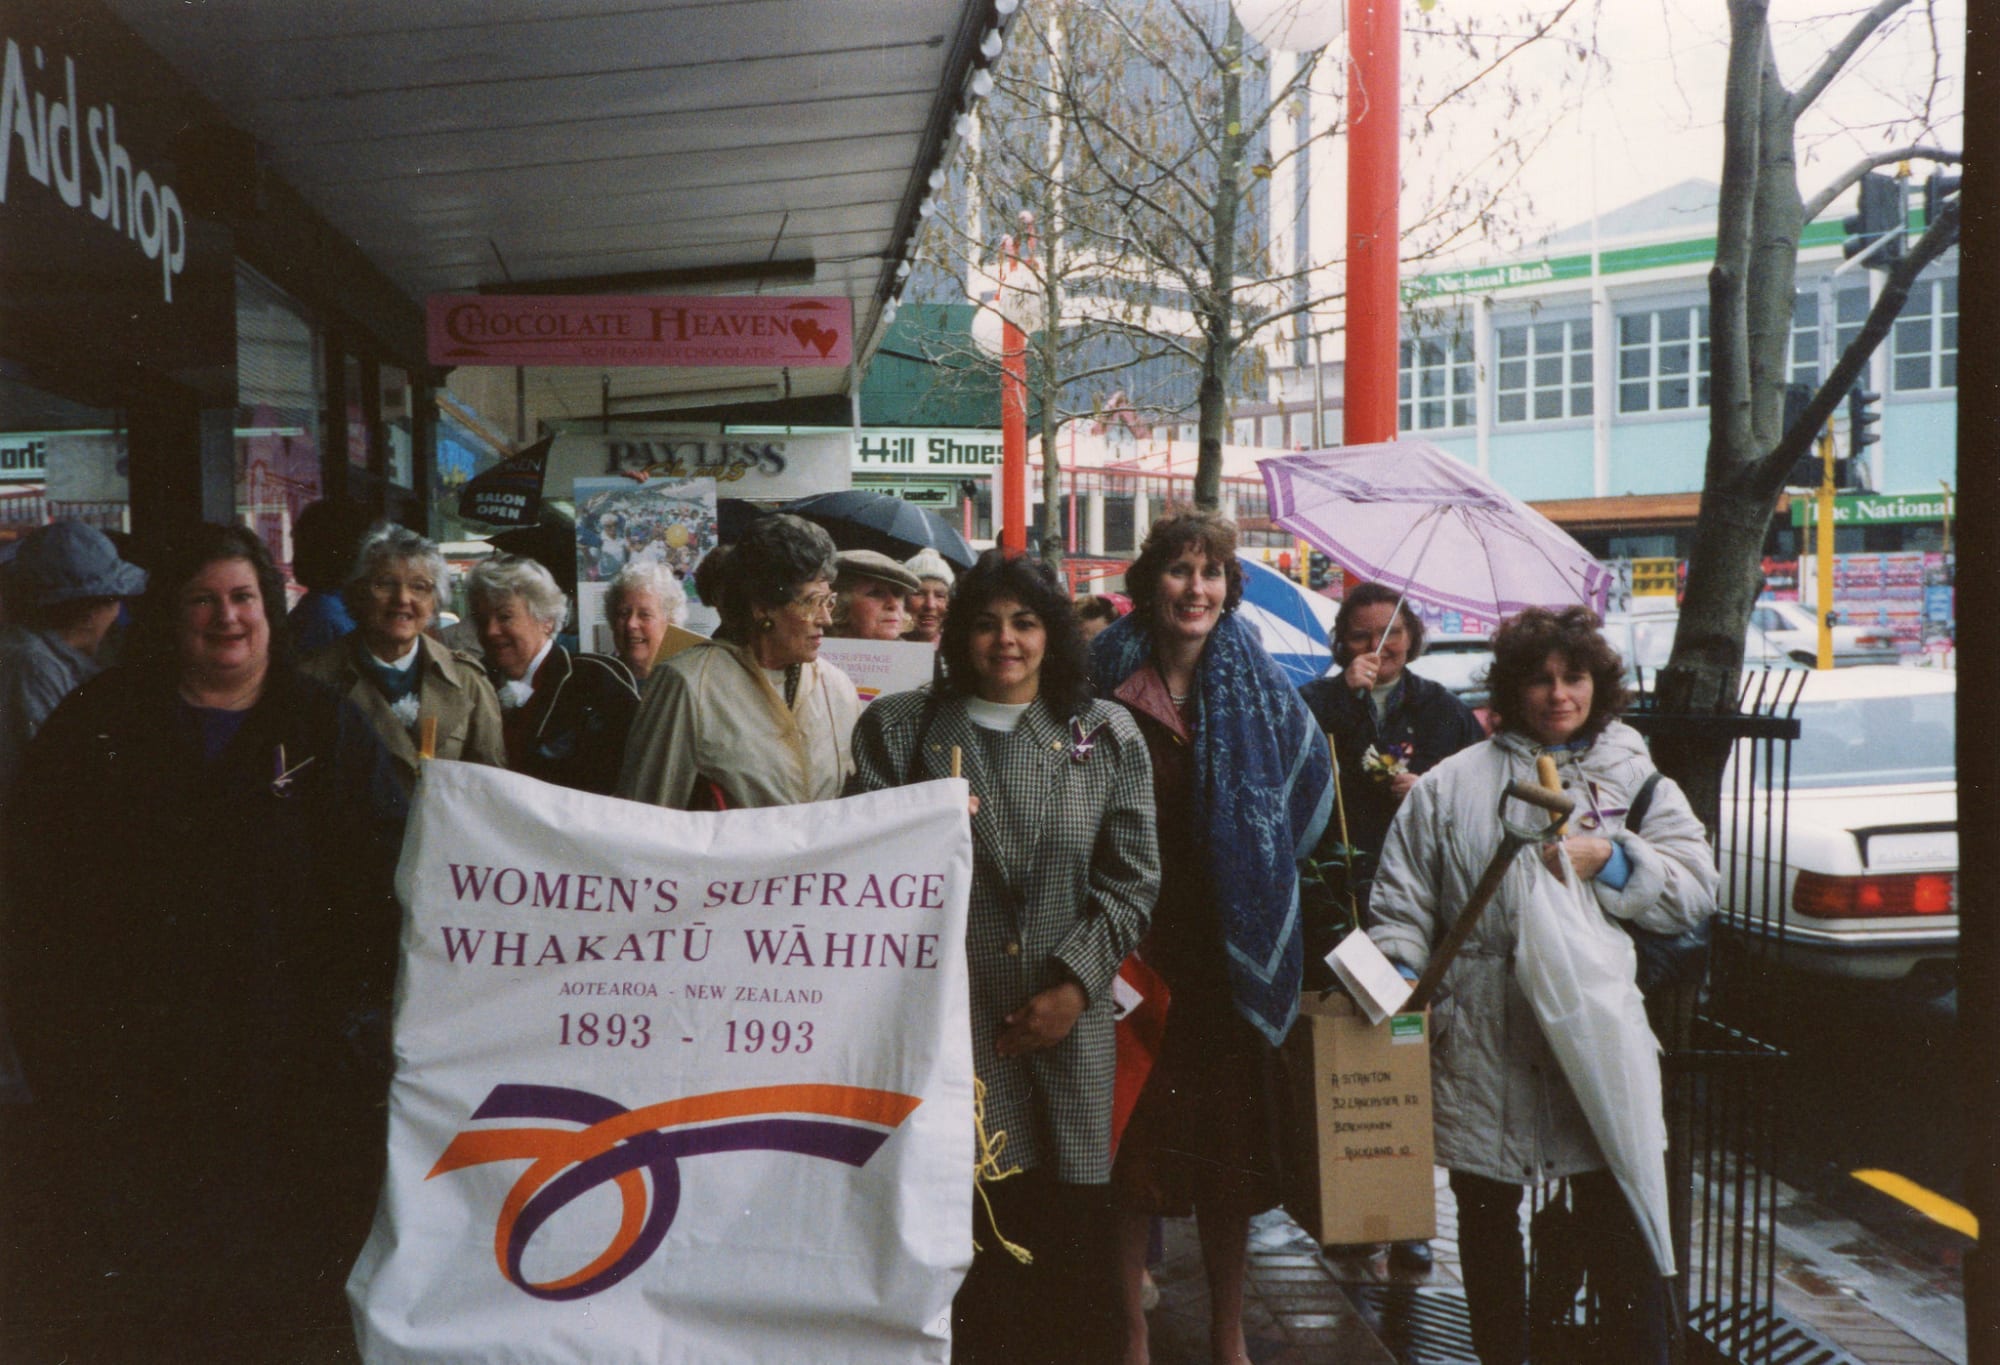 This photograph comes from an album created by the North Shore Womens Suffrage Centennial Co-ordinating Committee. It was taken on 19 September, 1993, exactly 100 years since the right to vote was extended to women.